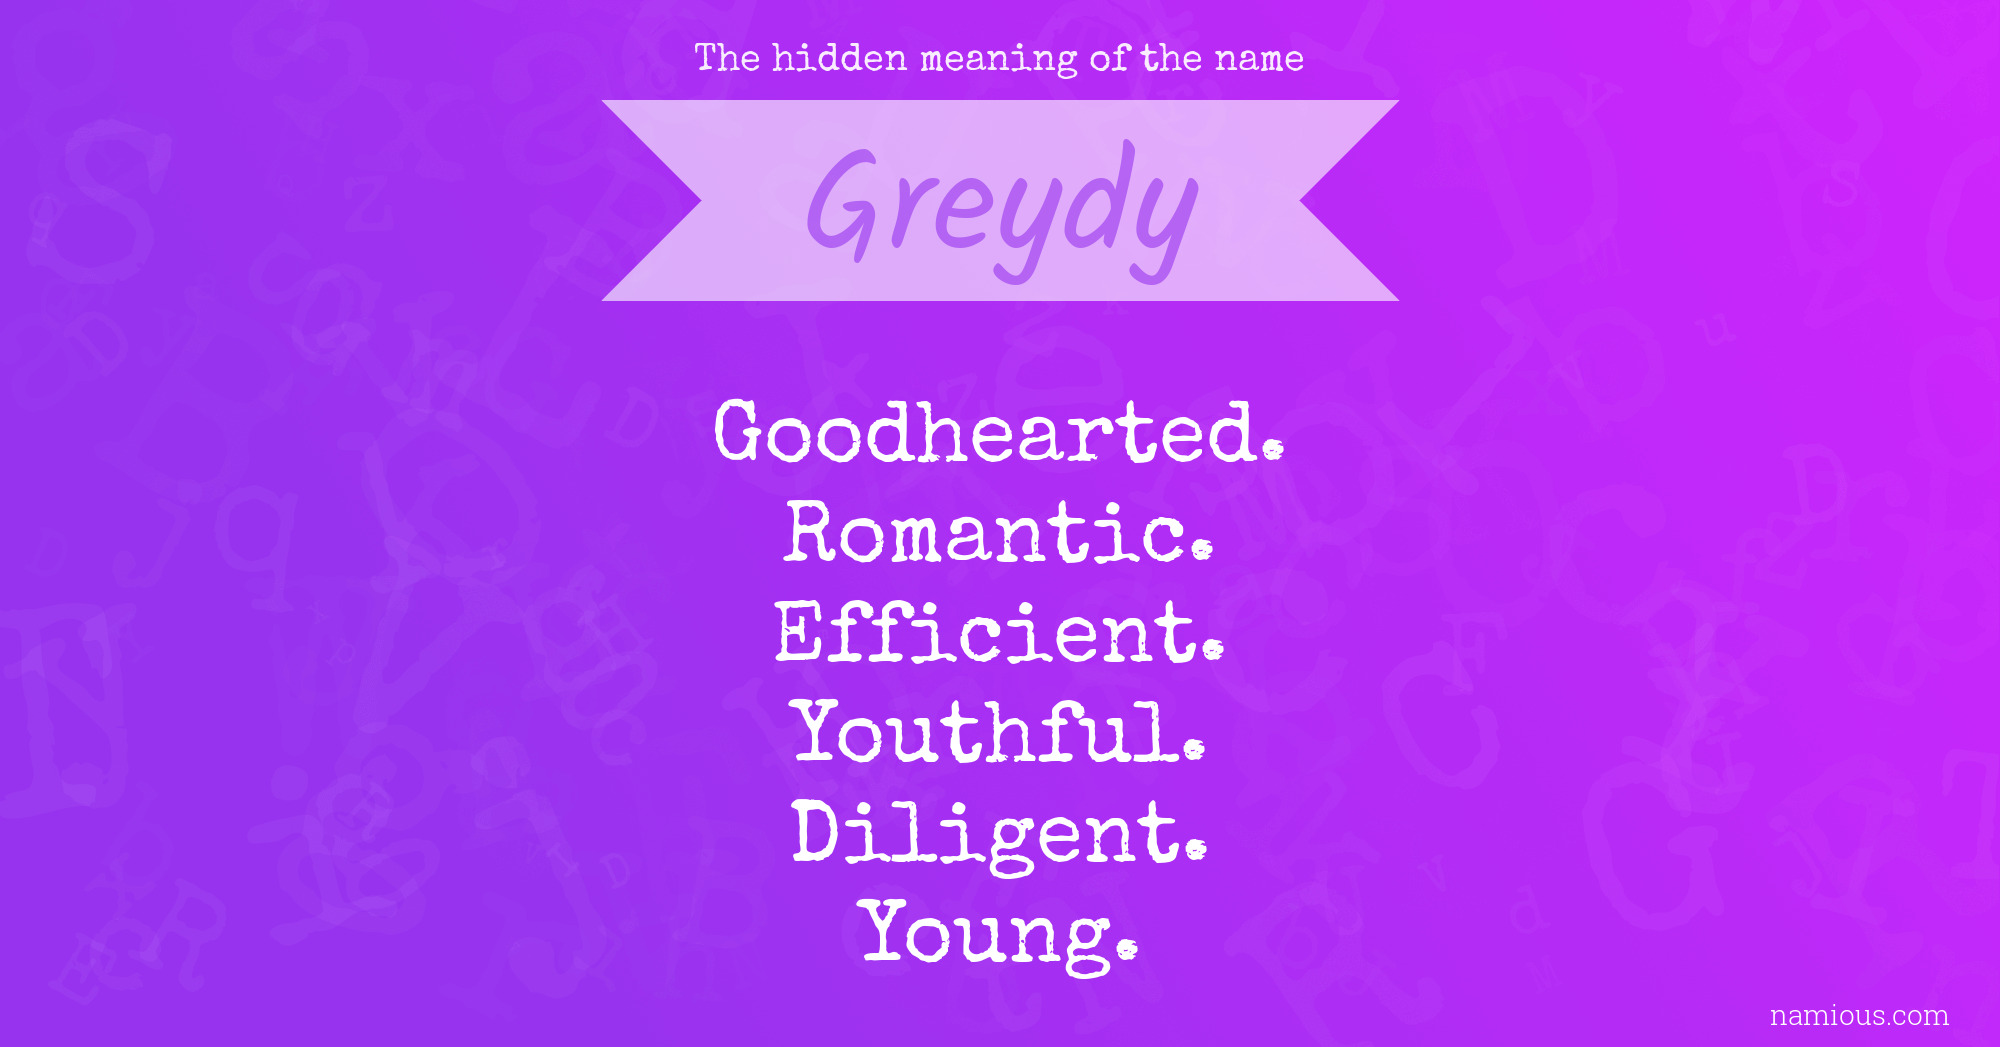 The hidden meaning of the name Greydy